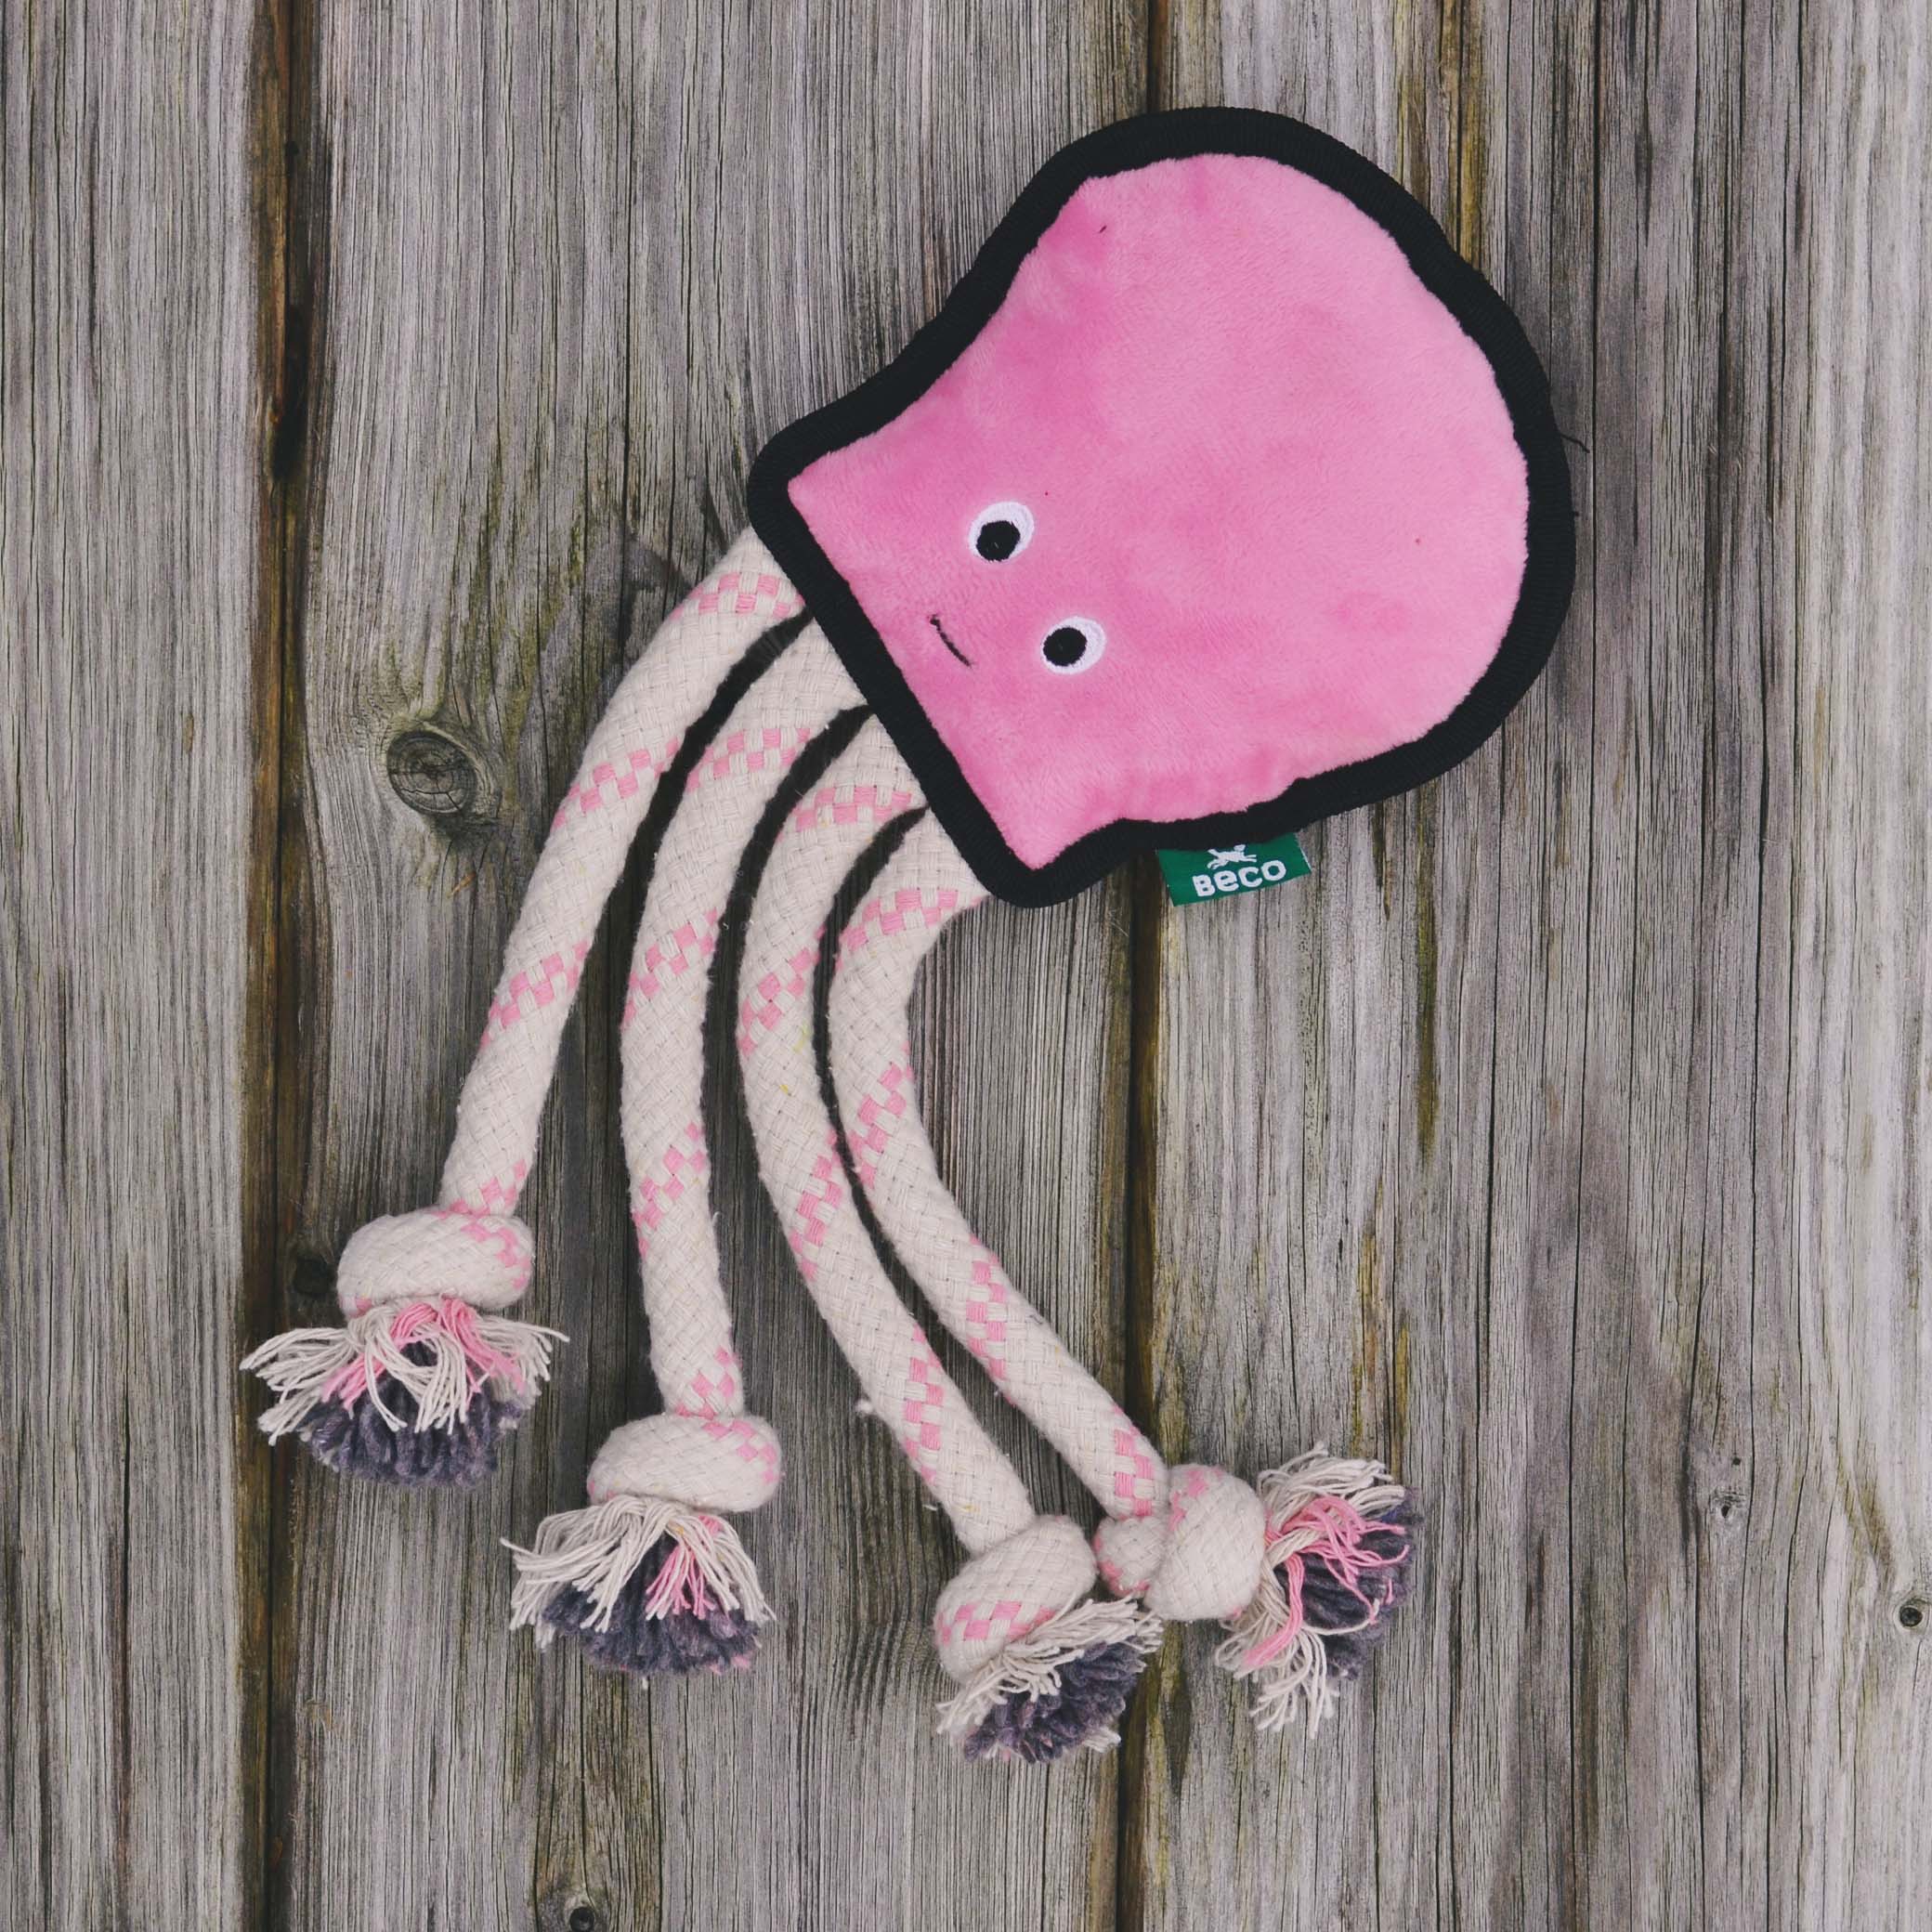 Rough & Tough Recycled Plastic Octopus Dog Toy (7461399068914)